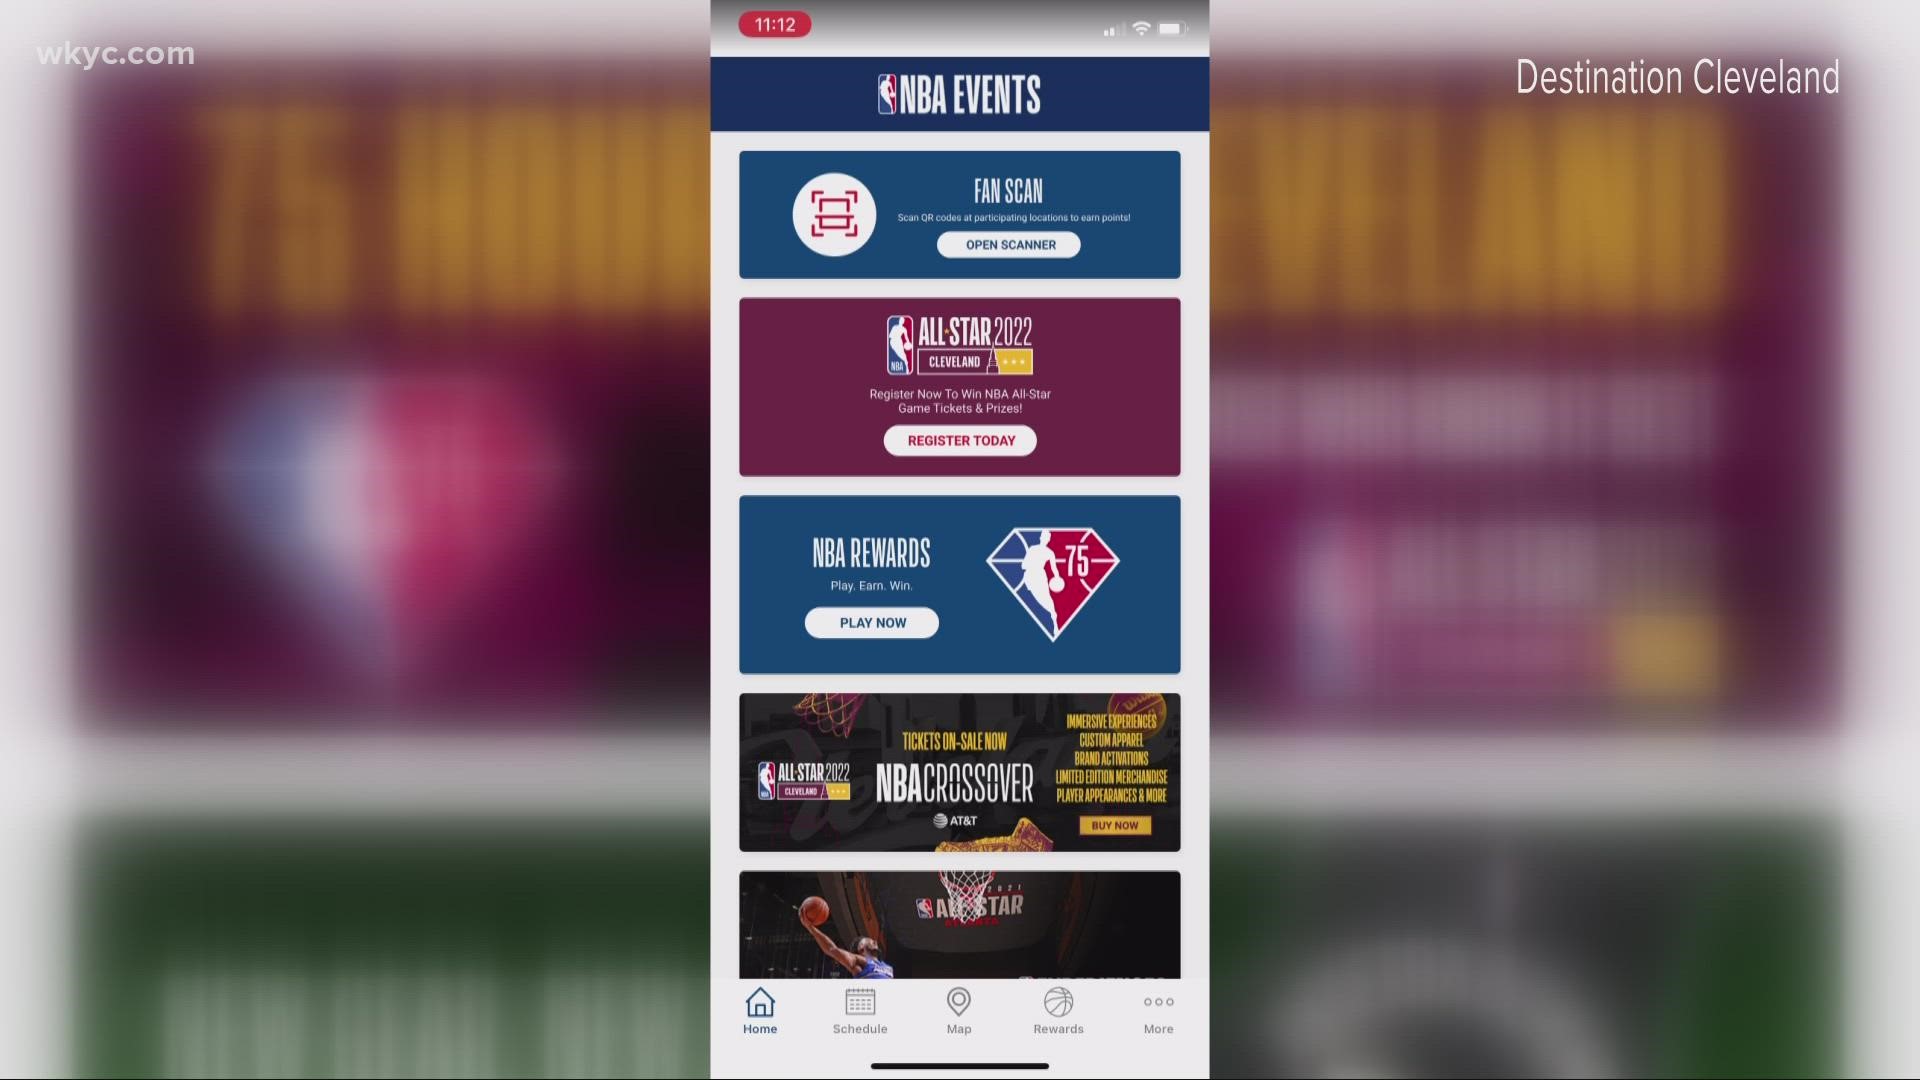 The NBA Events app is your tool to help guide you through what is sure to be a good time!